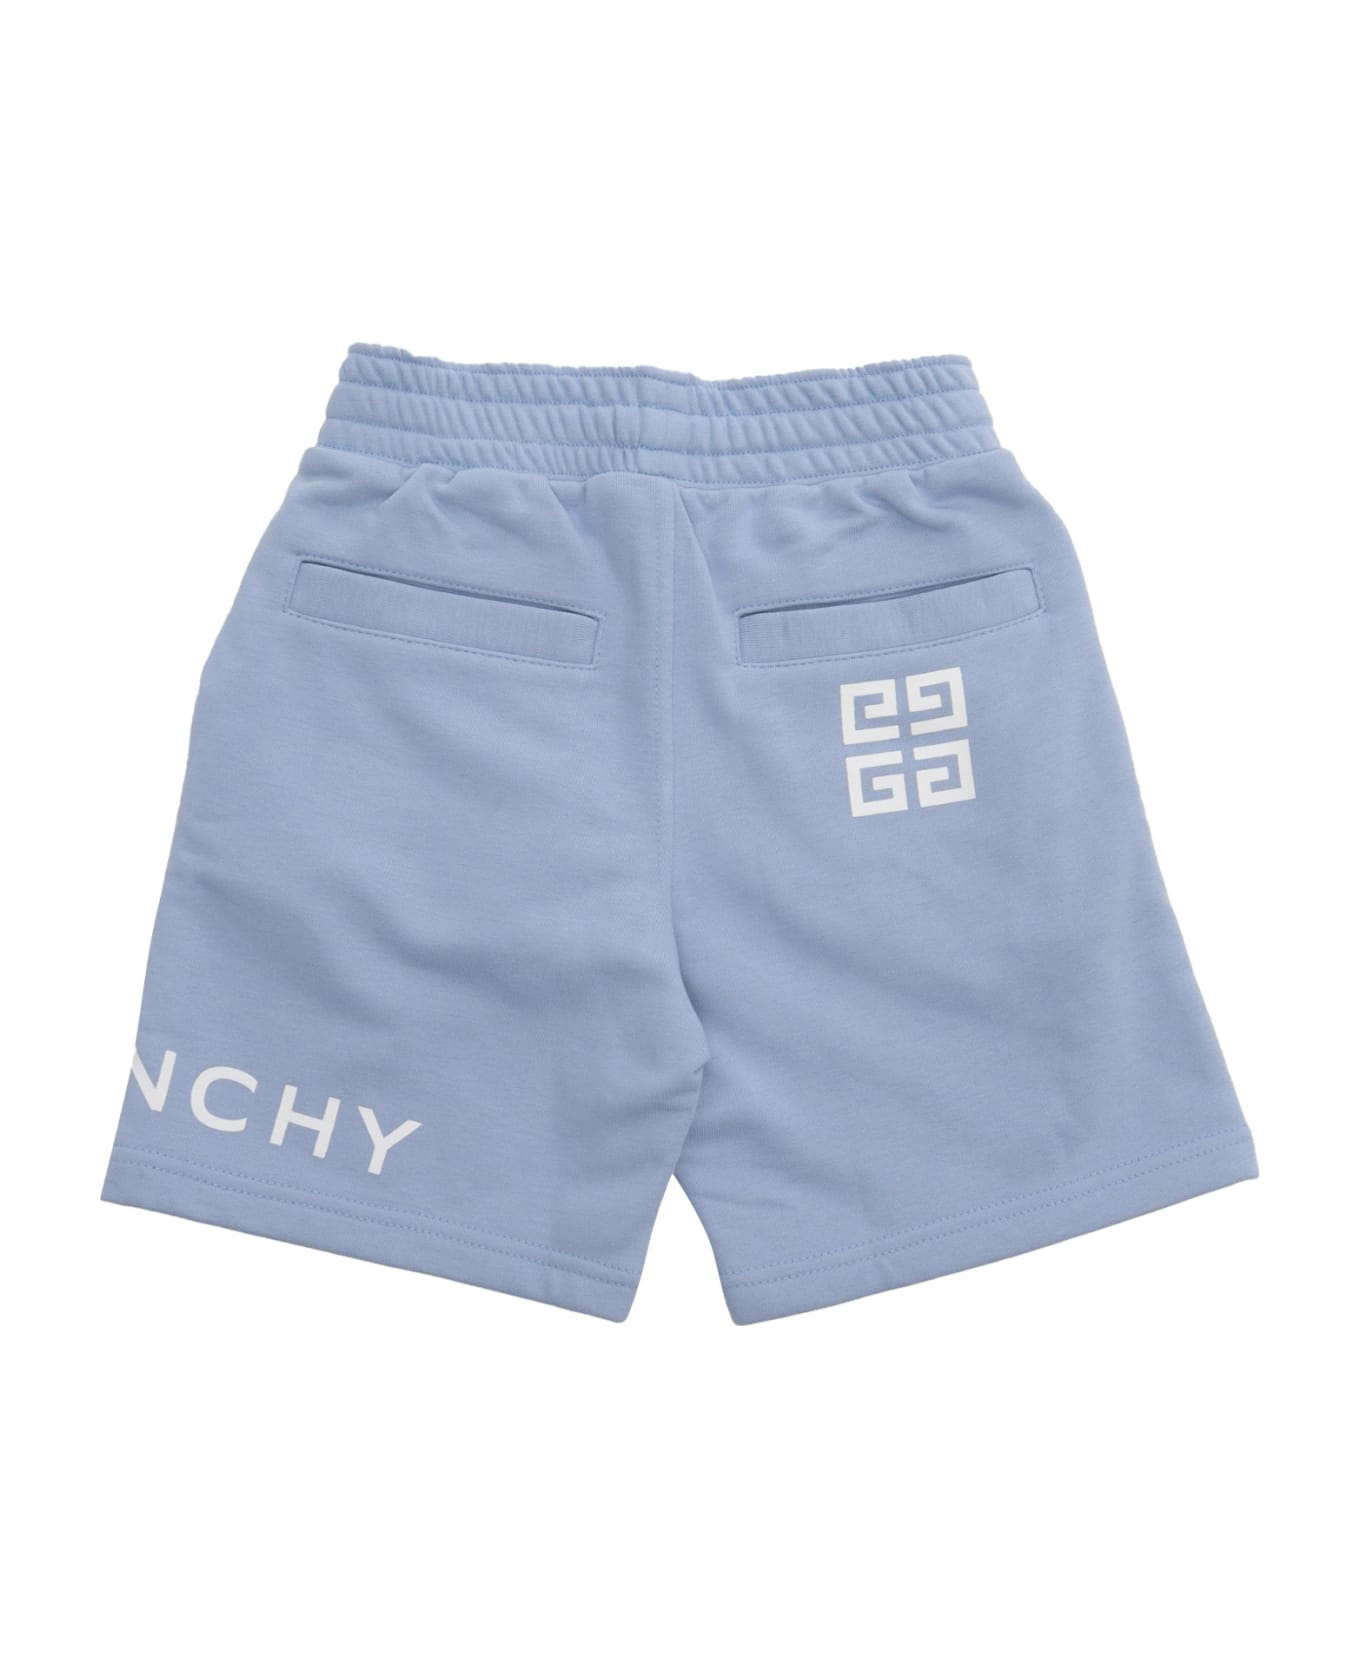 Givenchy Terry Shorts - BLUE